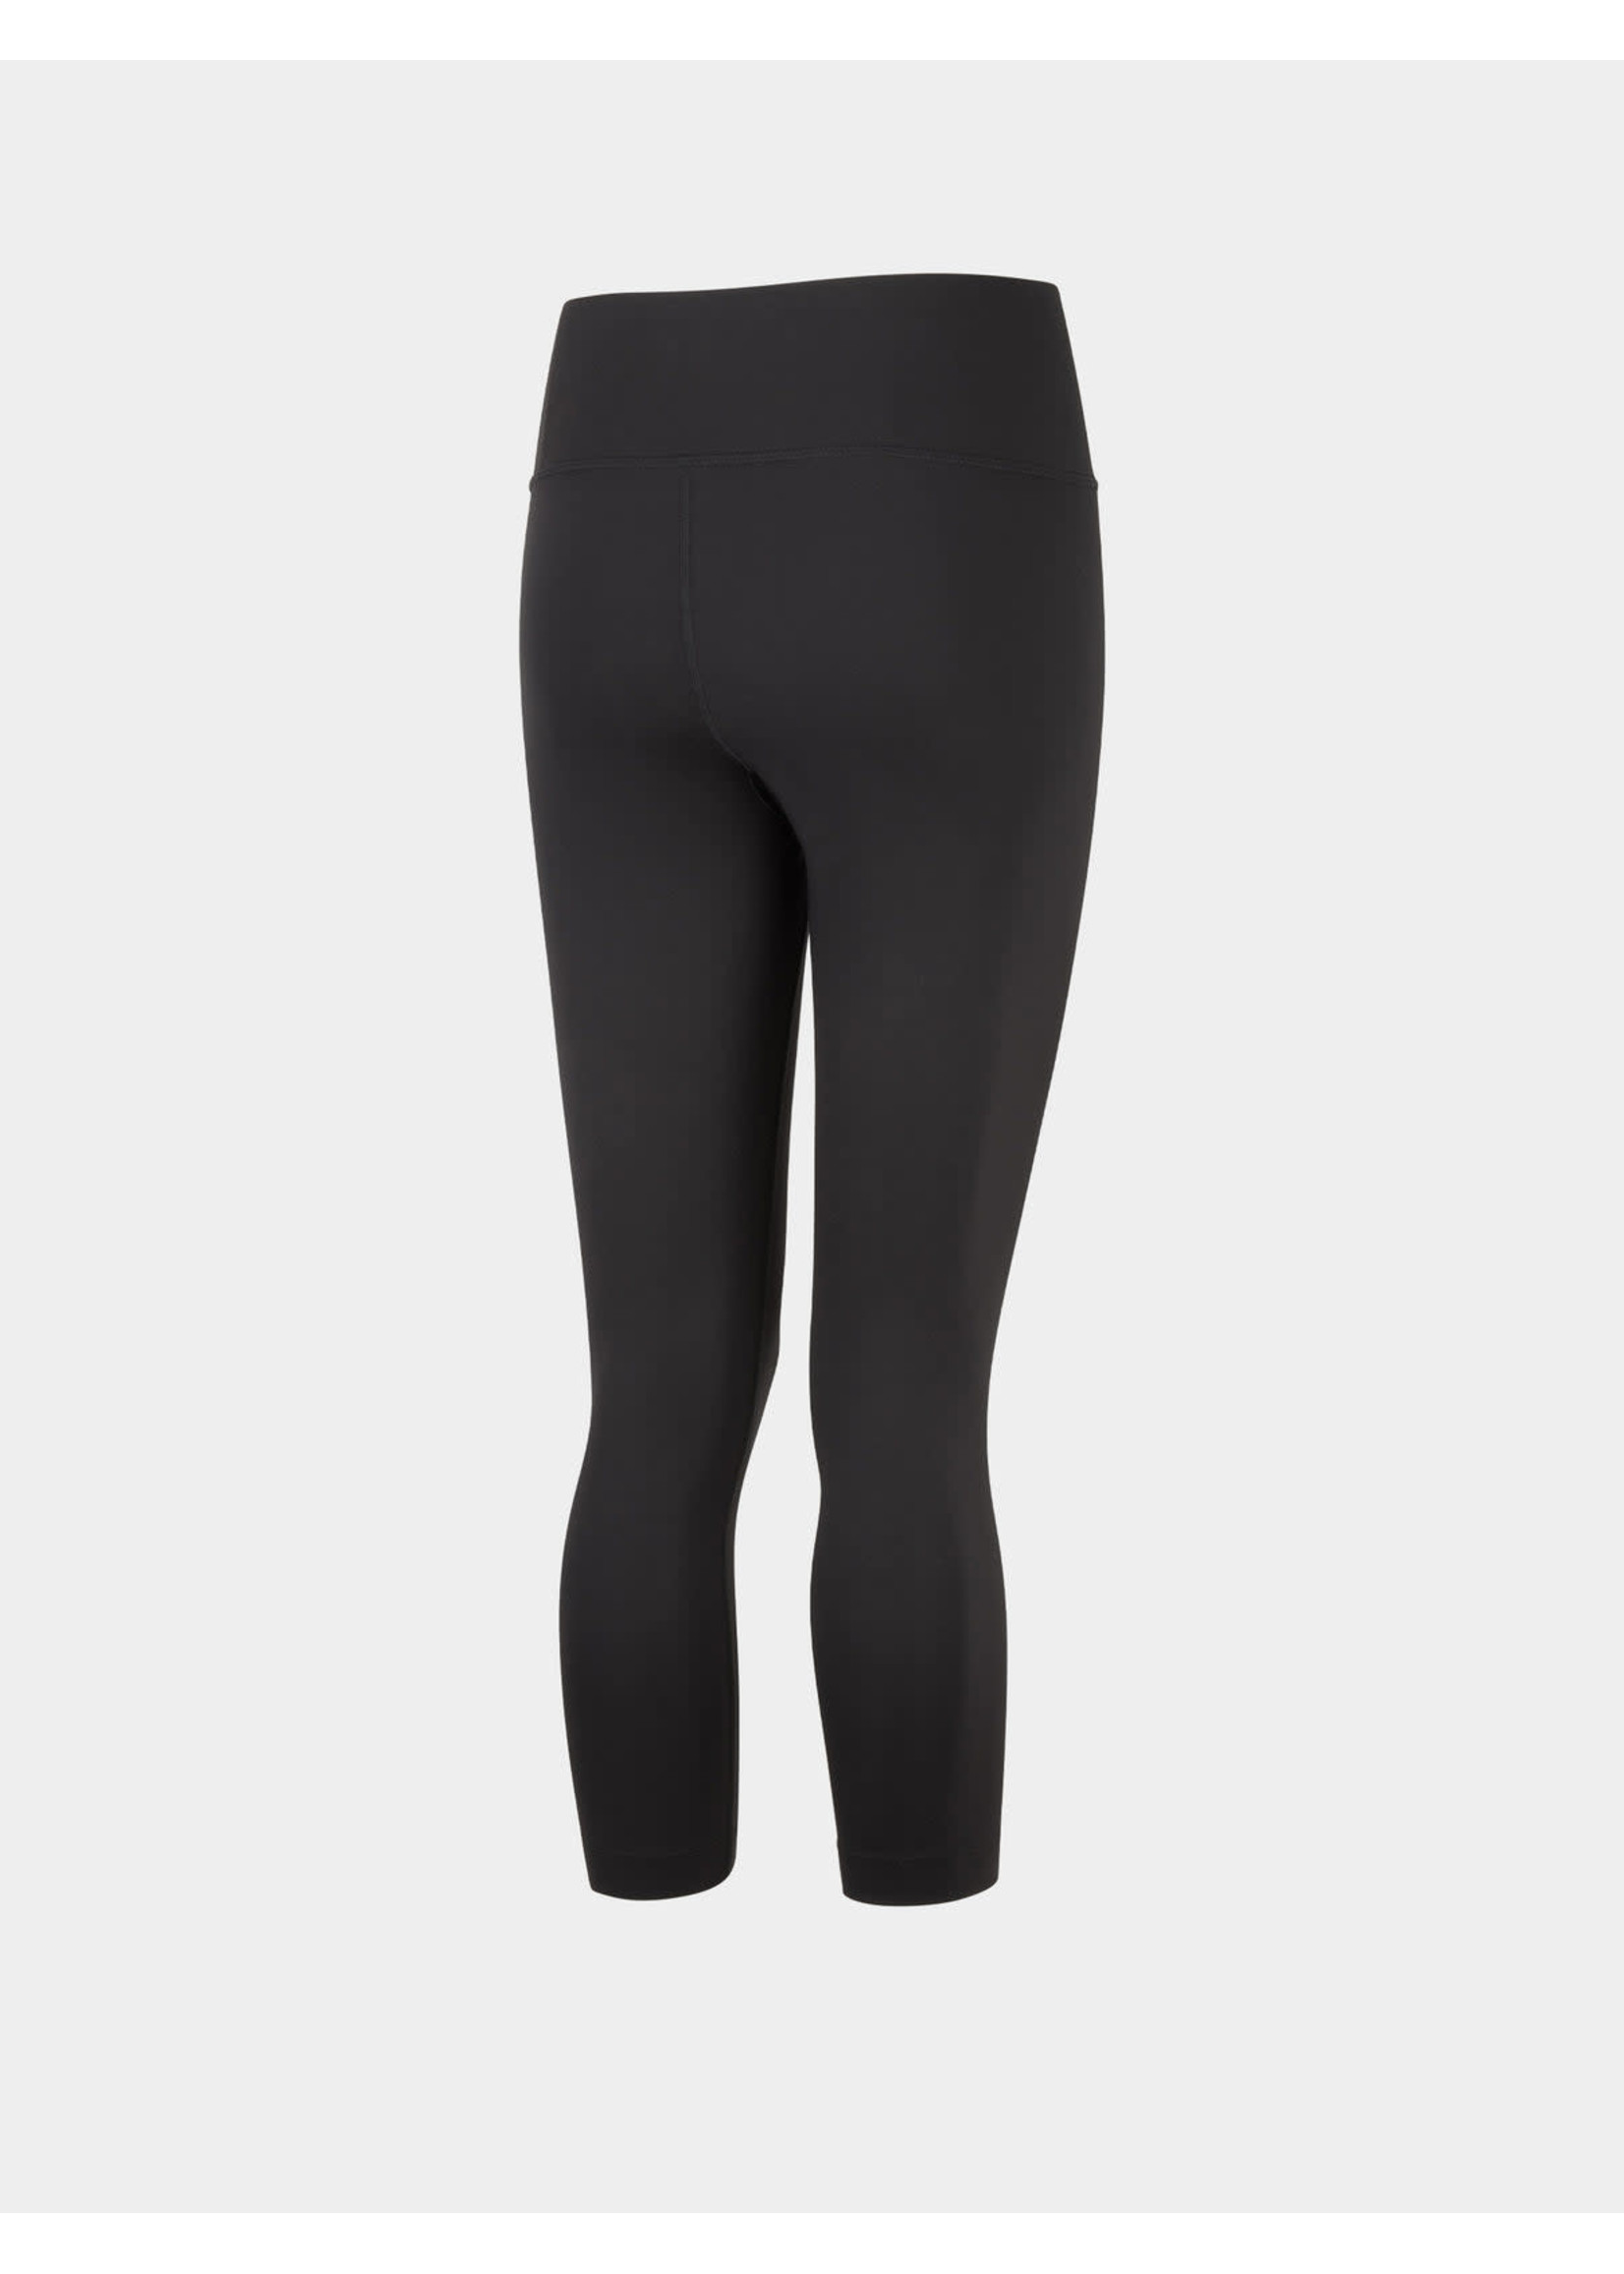 Ronhill Ronhill Core Crop Ladies Tight (2022) - Black